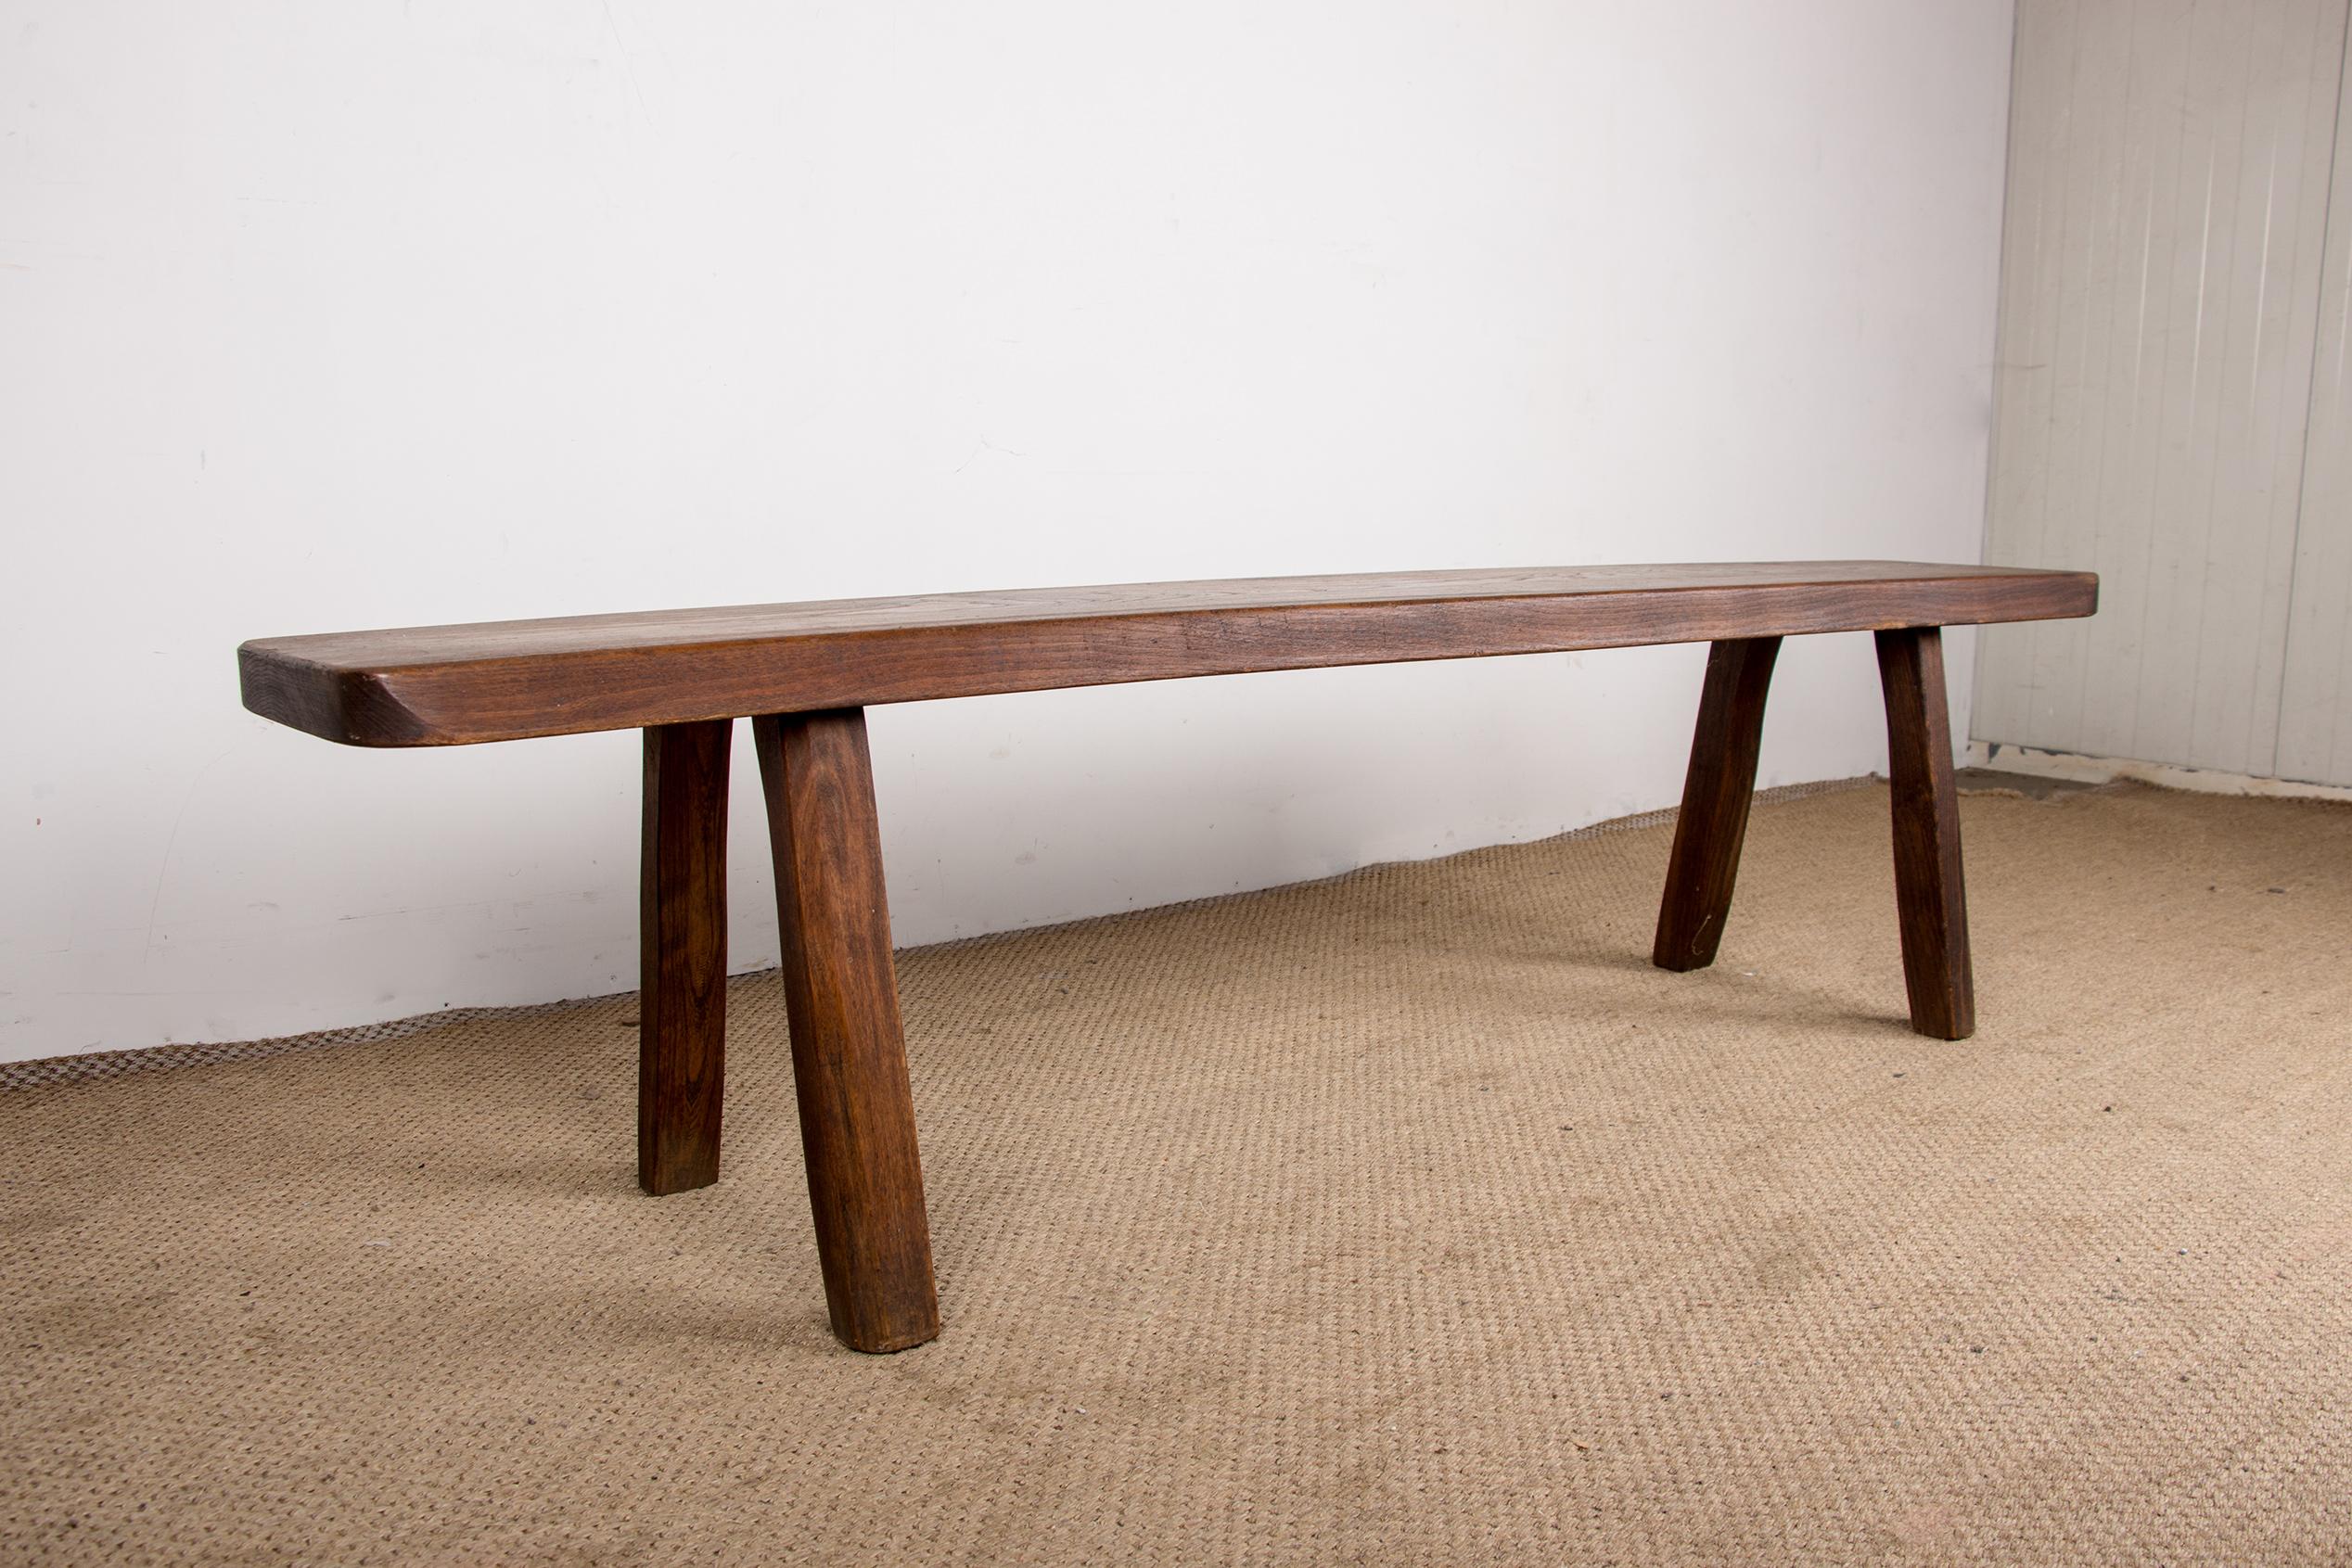 Superb benches with brutalist design. High quality cabinetmaking work. Extremely robust. Solid wood.
